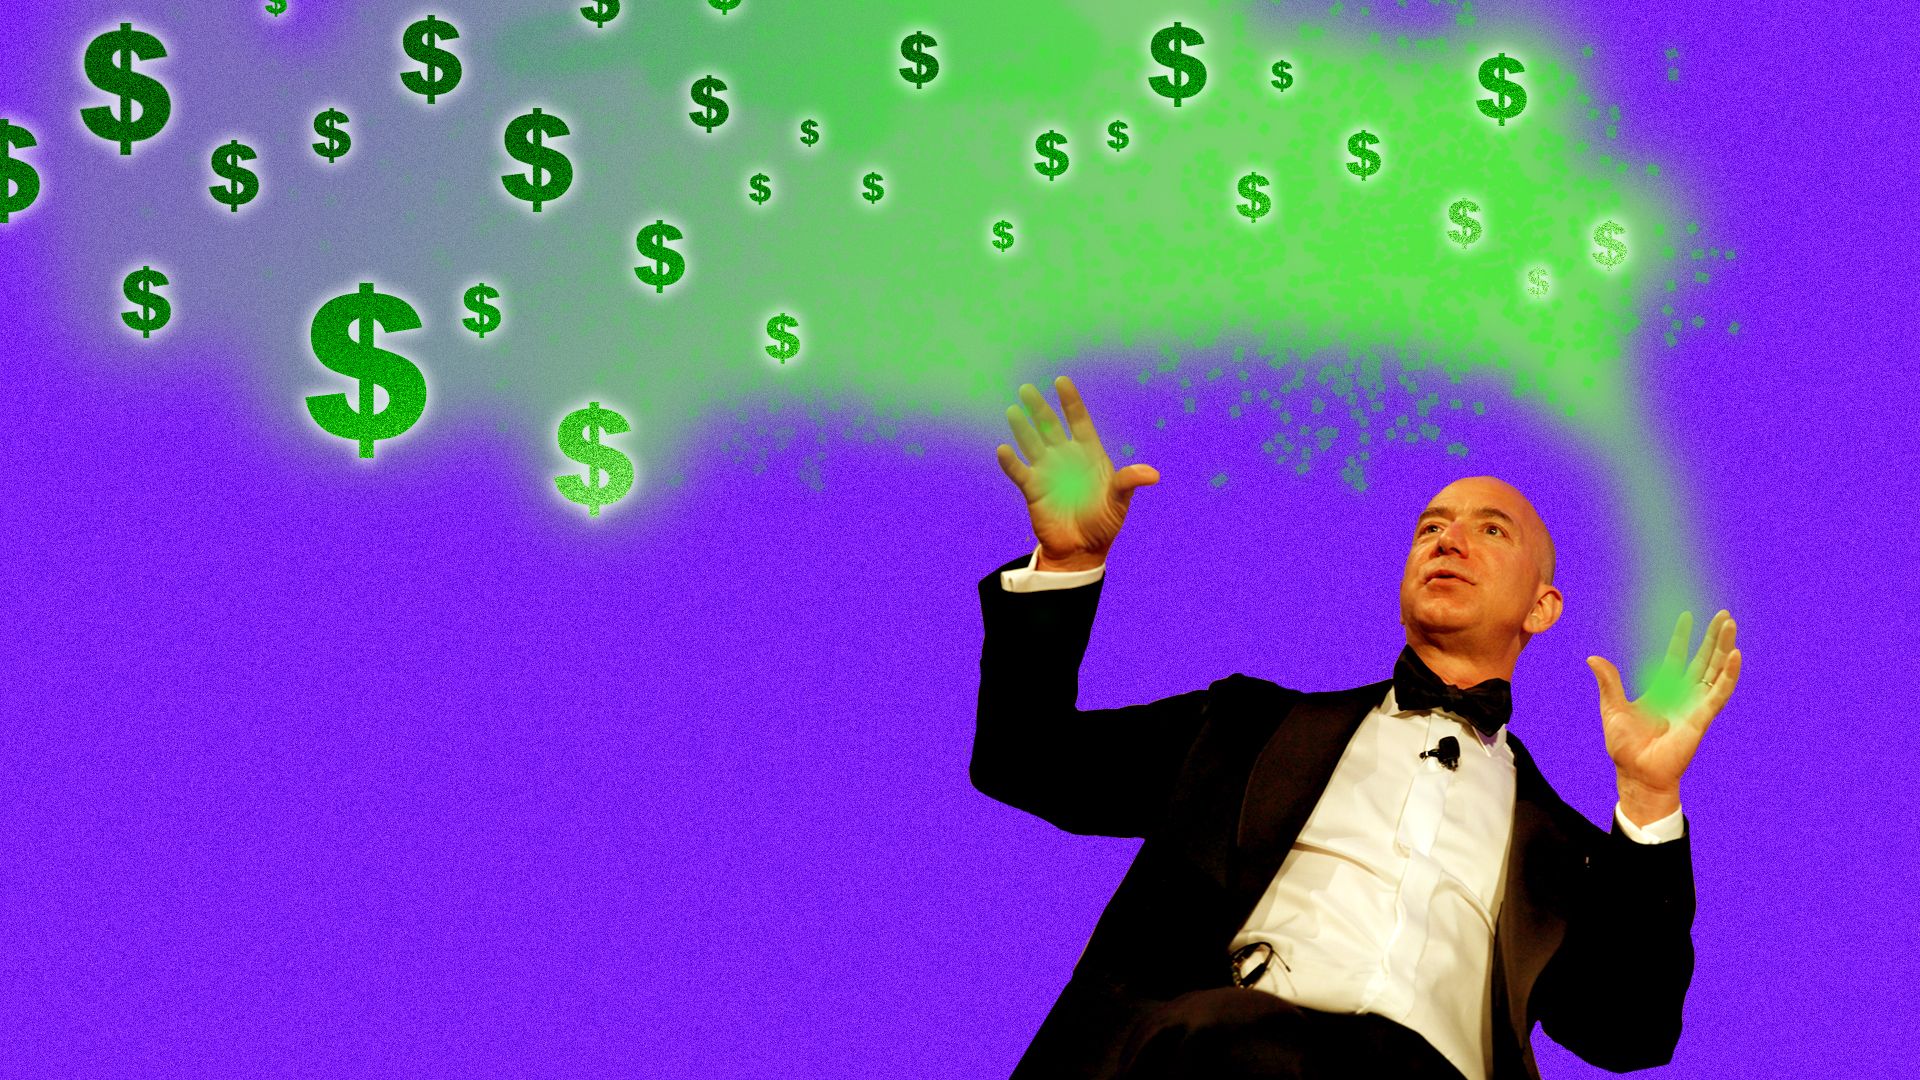 Jeff Bezos in a tuxedo, with green fog and dollar signs emanating from his hands